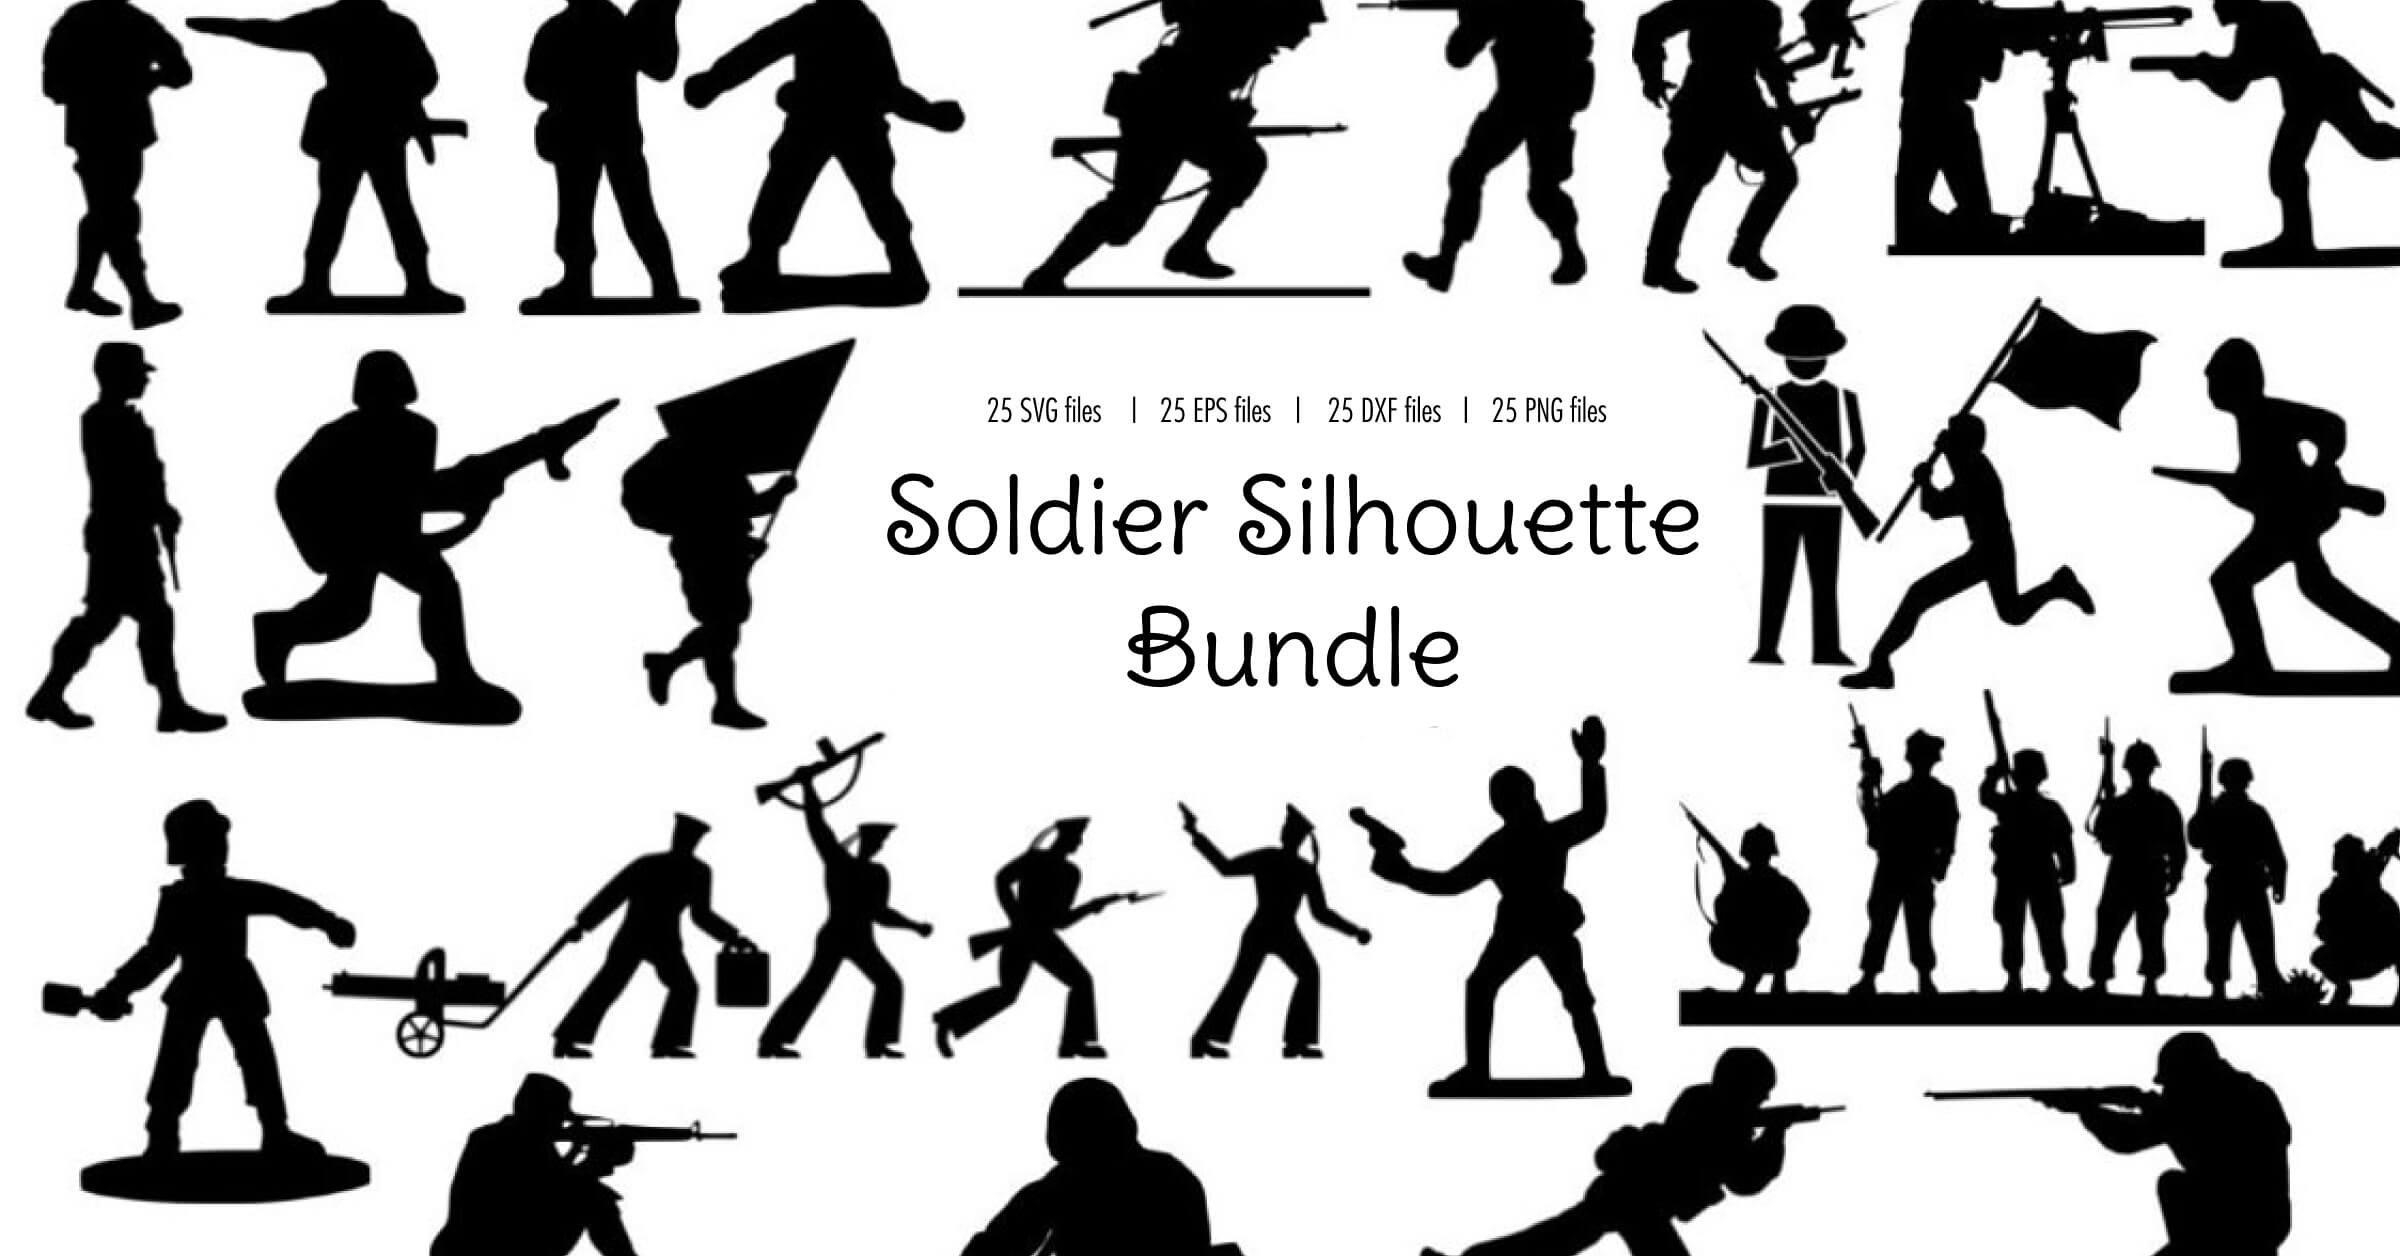 Silhouettes of soldiers actively moving with weapons.